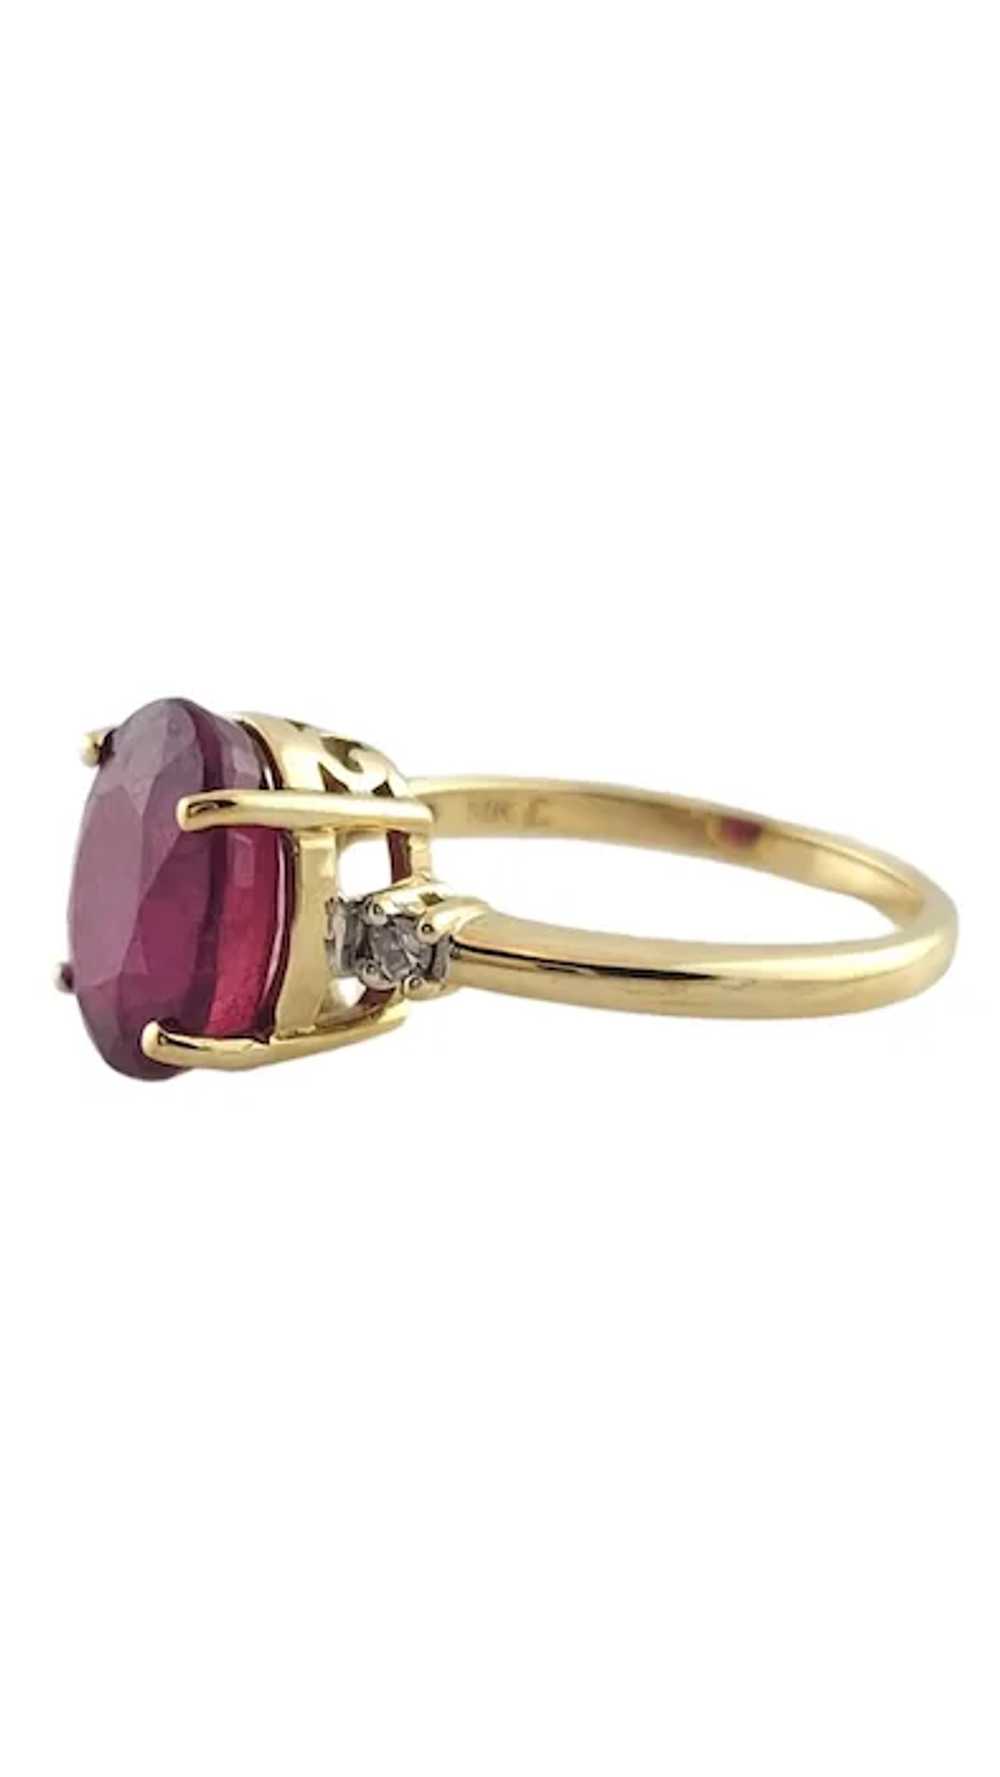 10K Yellow Gold Glass-Filled Ruby Ring Size 5.25 … - image 2